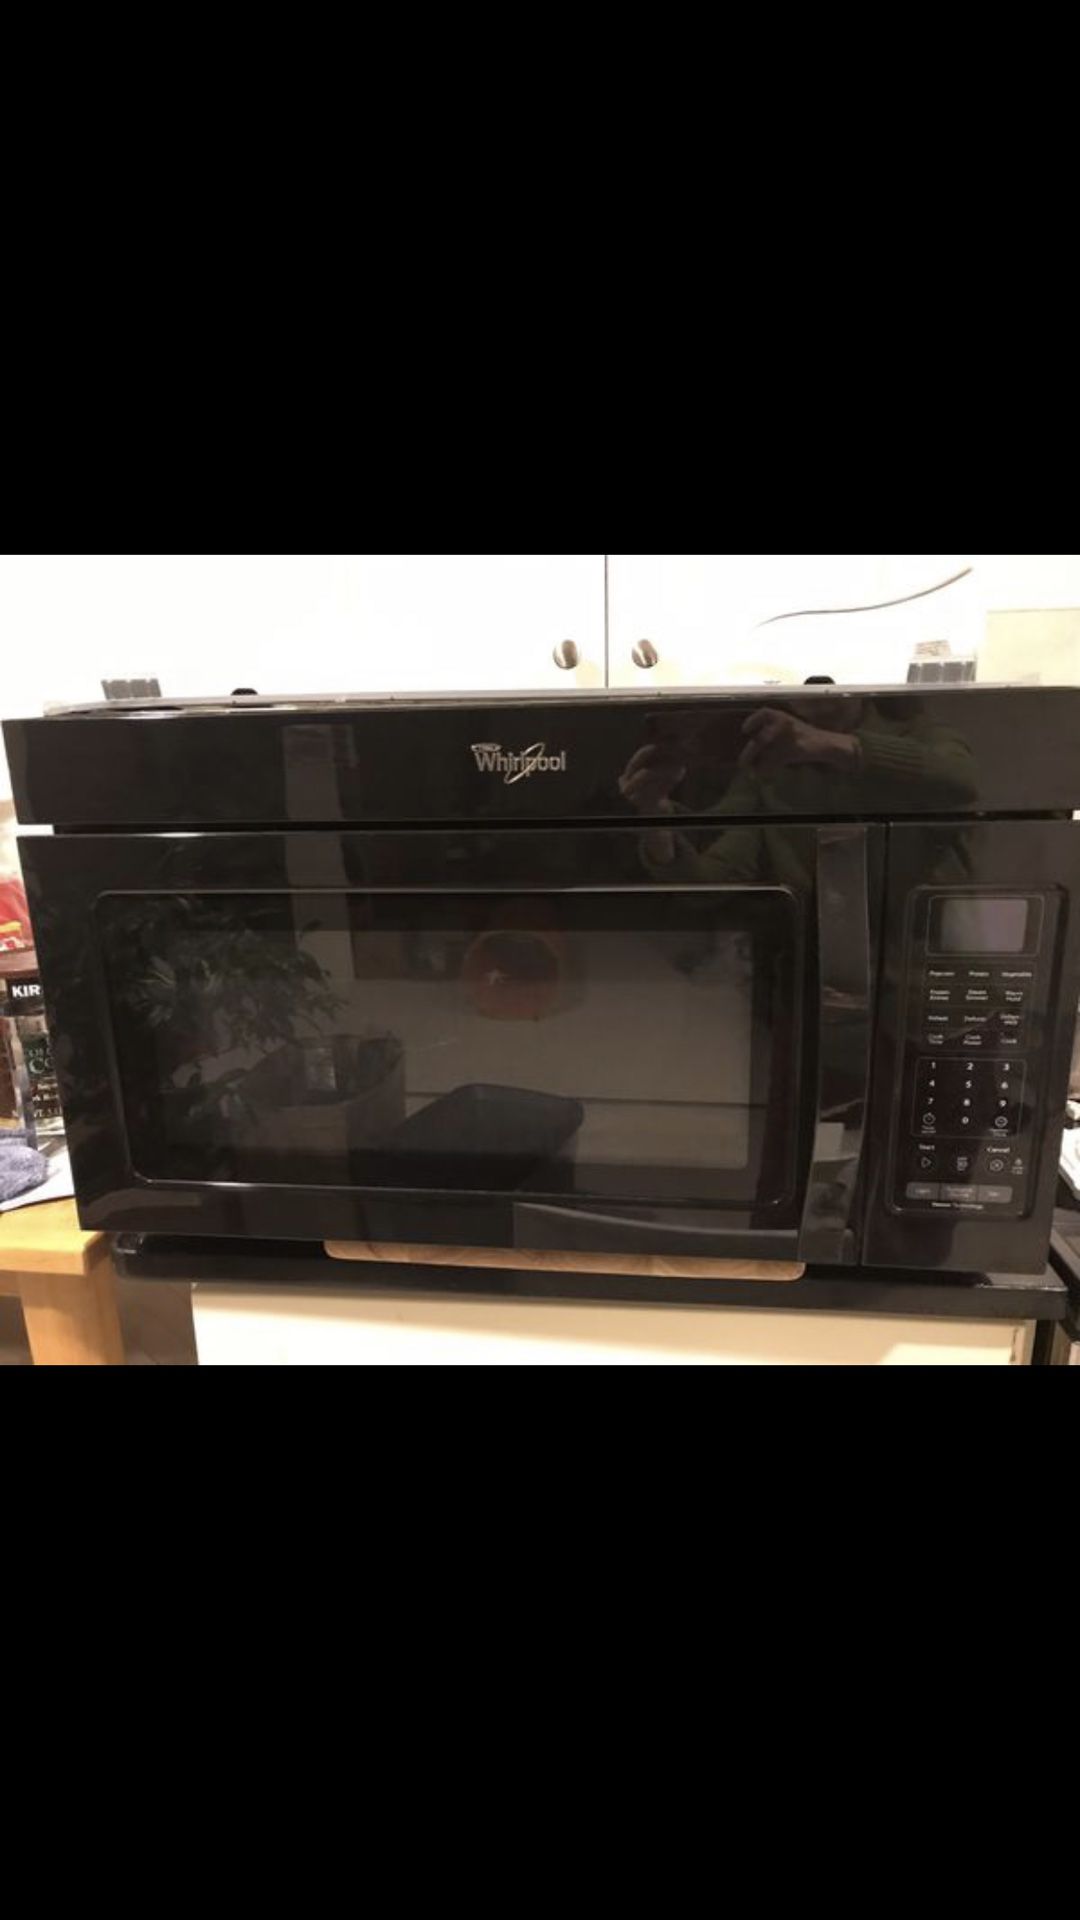 1.9 cu. ft. Capacity Steam Microwave With Sensor Cooking